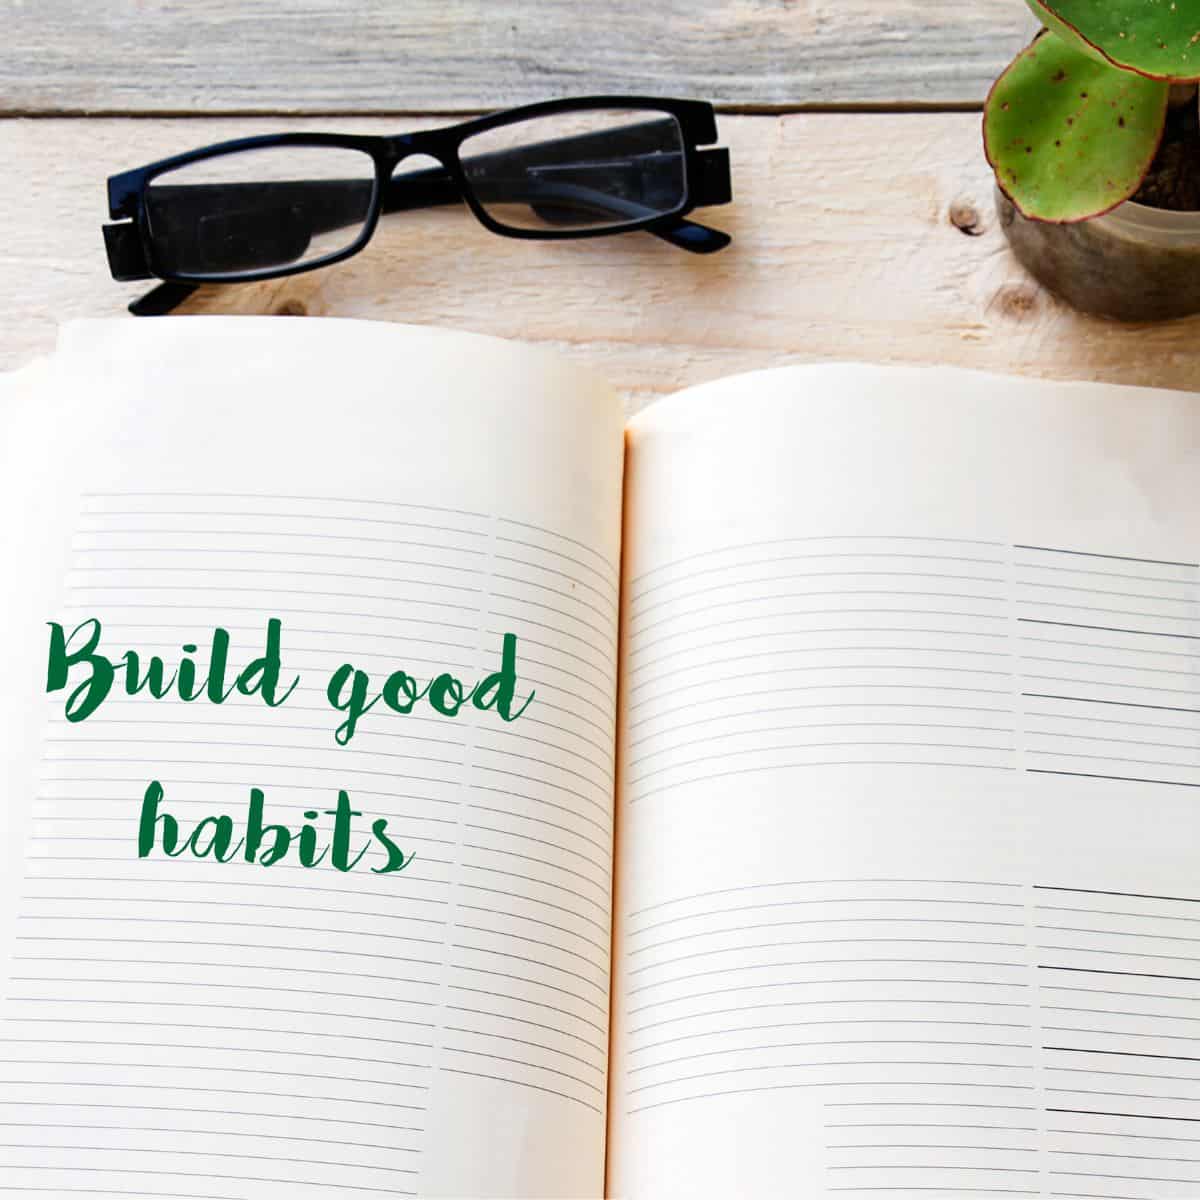 "build good habits" written on a book